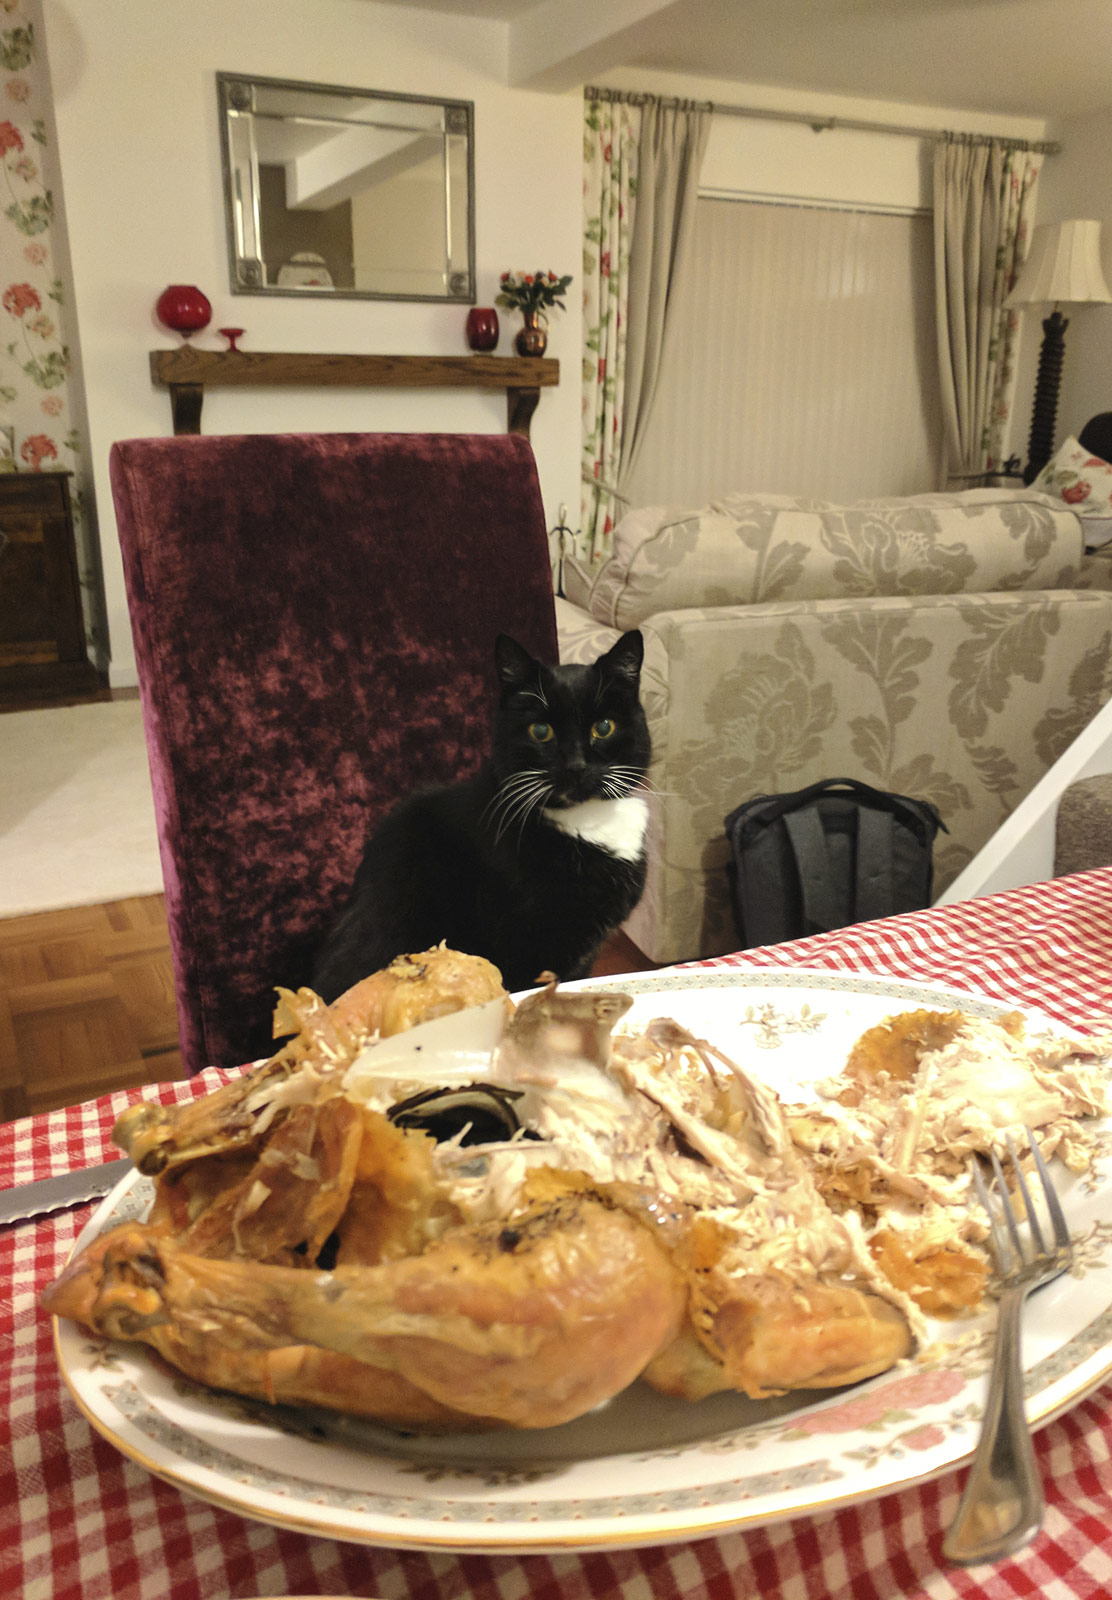 Cat looking at chicken